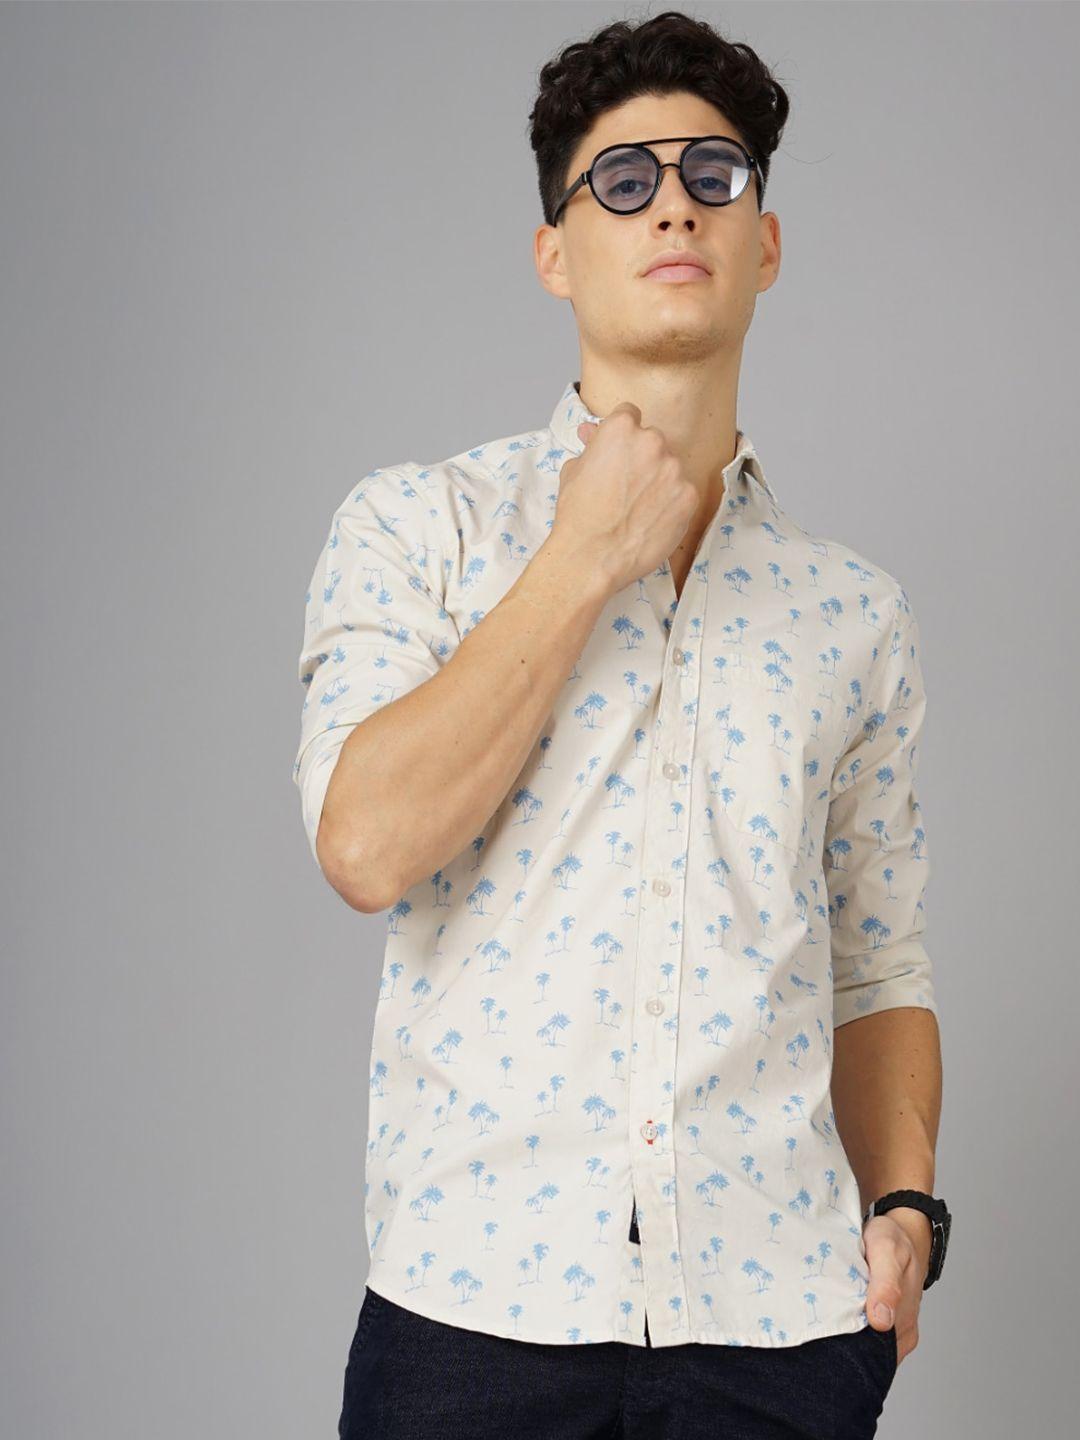 paul-street-standard-slim-fit-floral-printed-spread-collar-cotton-casual-shirt